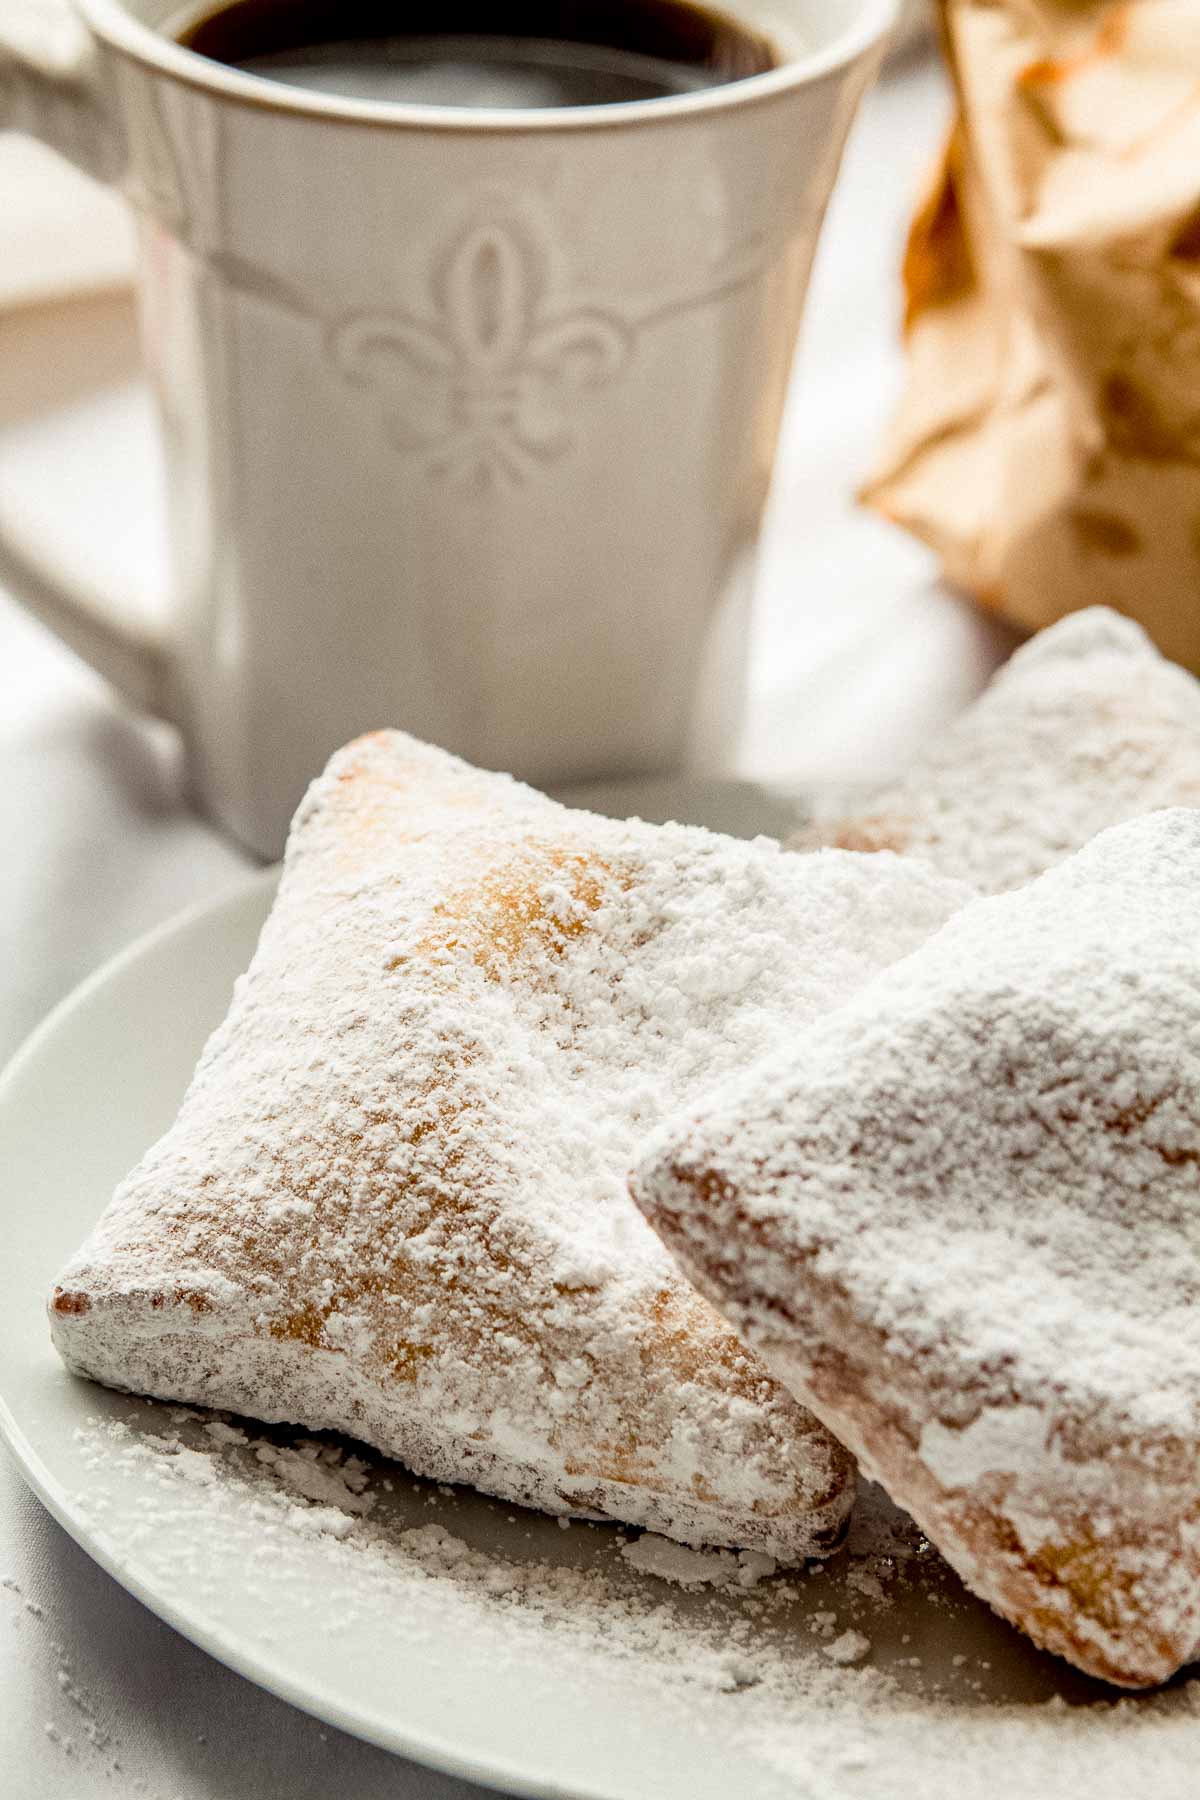 3 New Orleans style beignets on a plate.